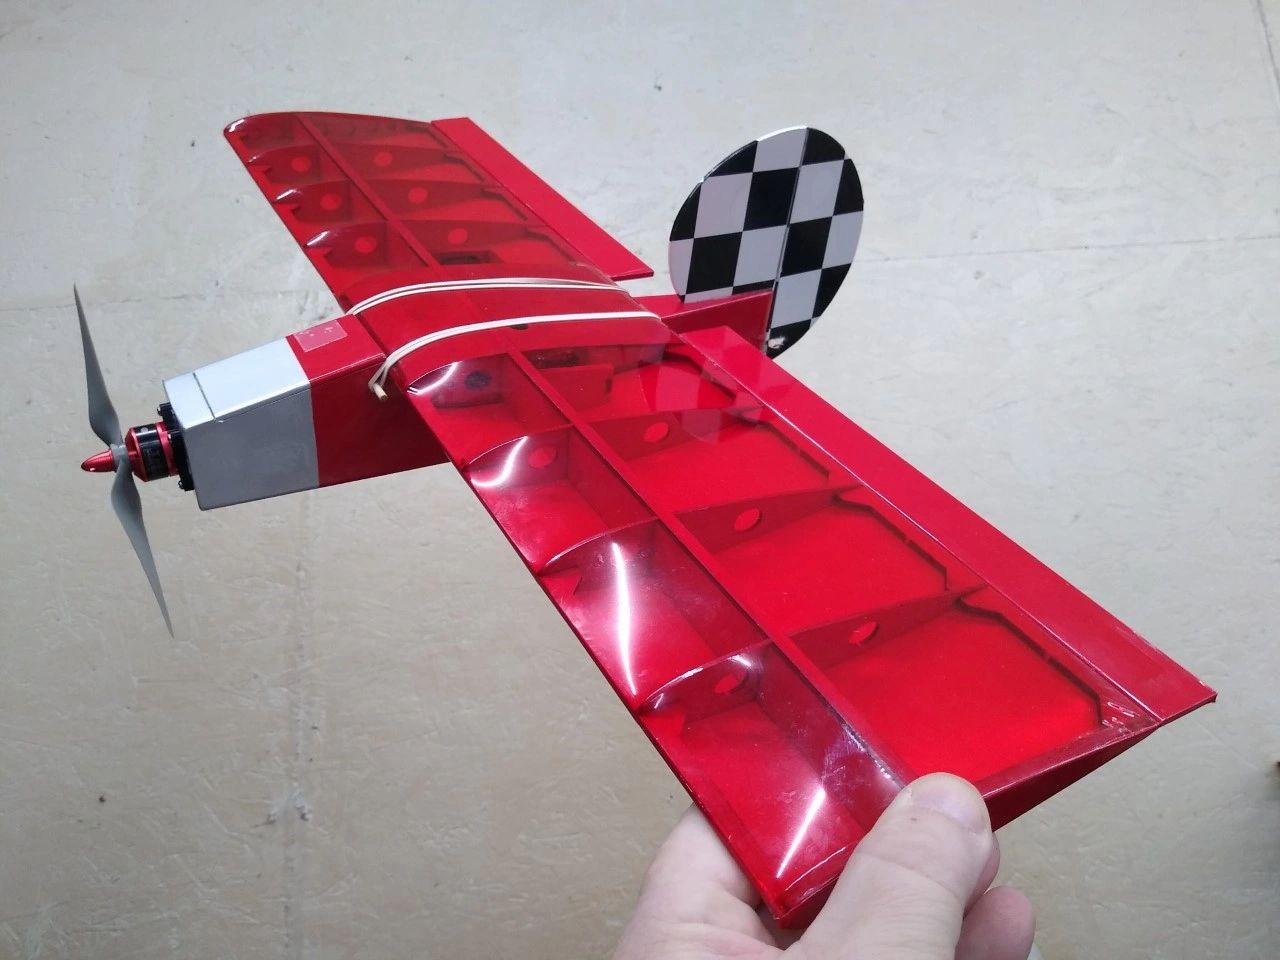 Hummer 250 RC Airplane Model Kit New Laser Cut by WillyNillies.com 